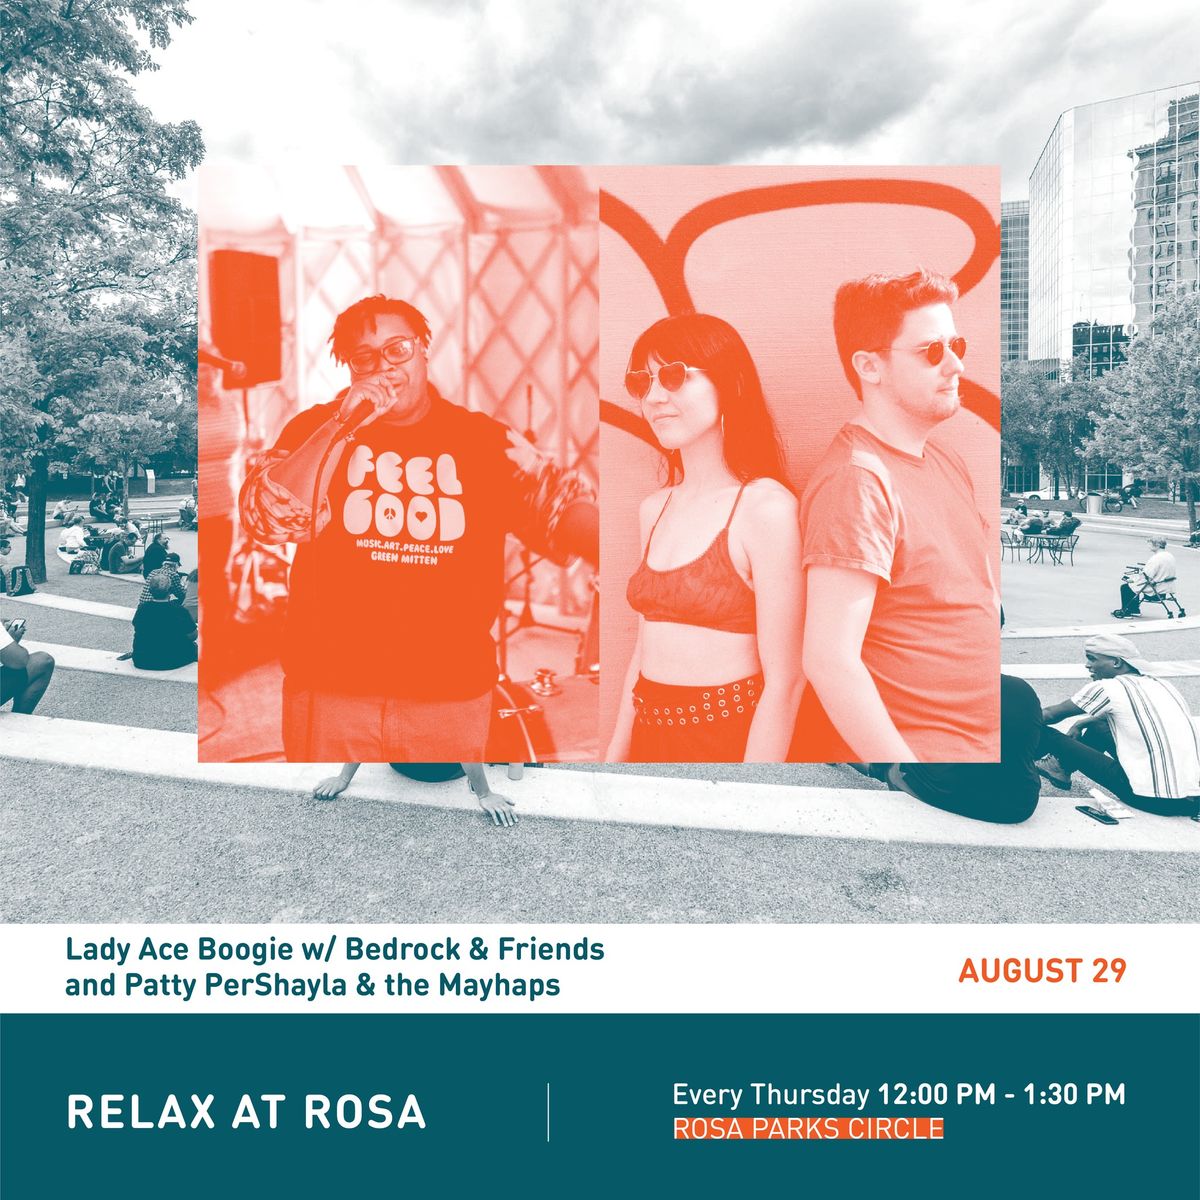 Relax at Rosa Concert Series | Lady Ace Boogie w\/ Bedrock & Friends | Patty Pershayla & The Mayhaps